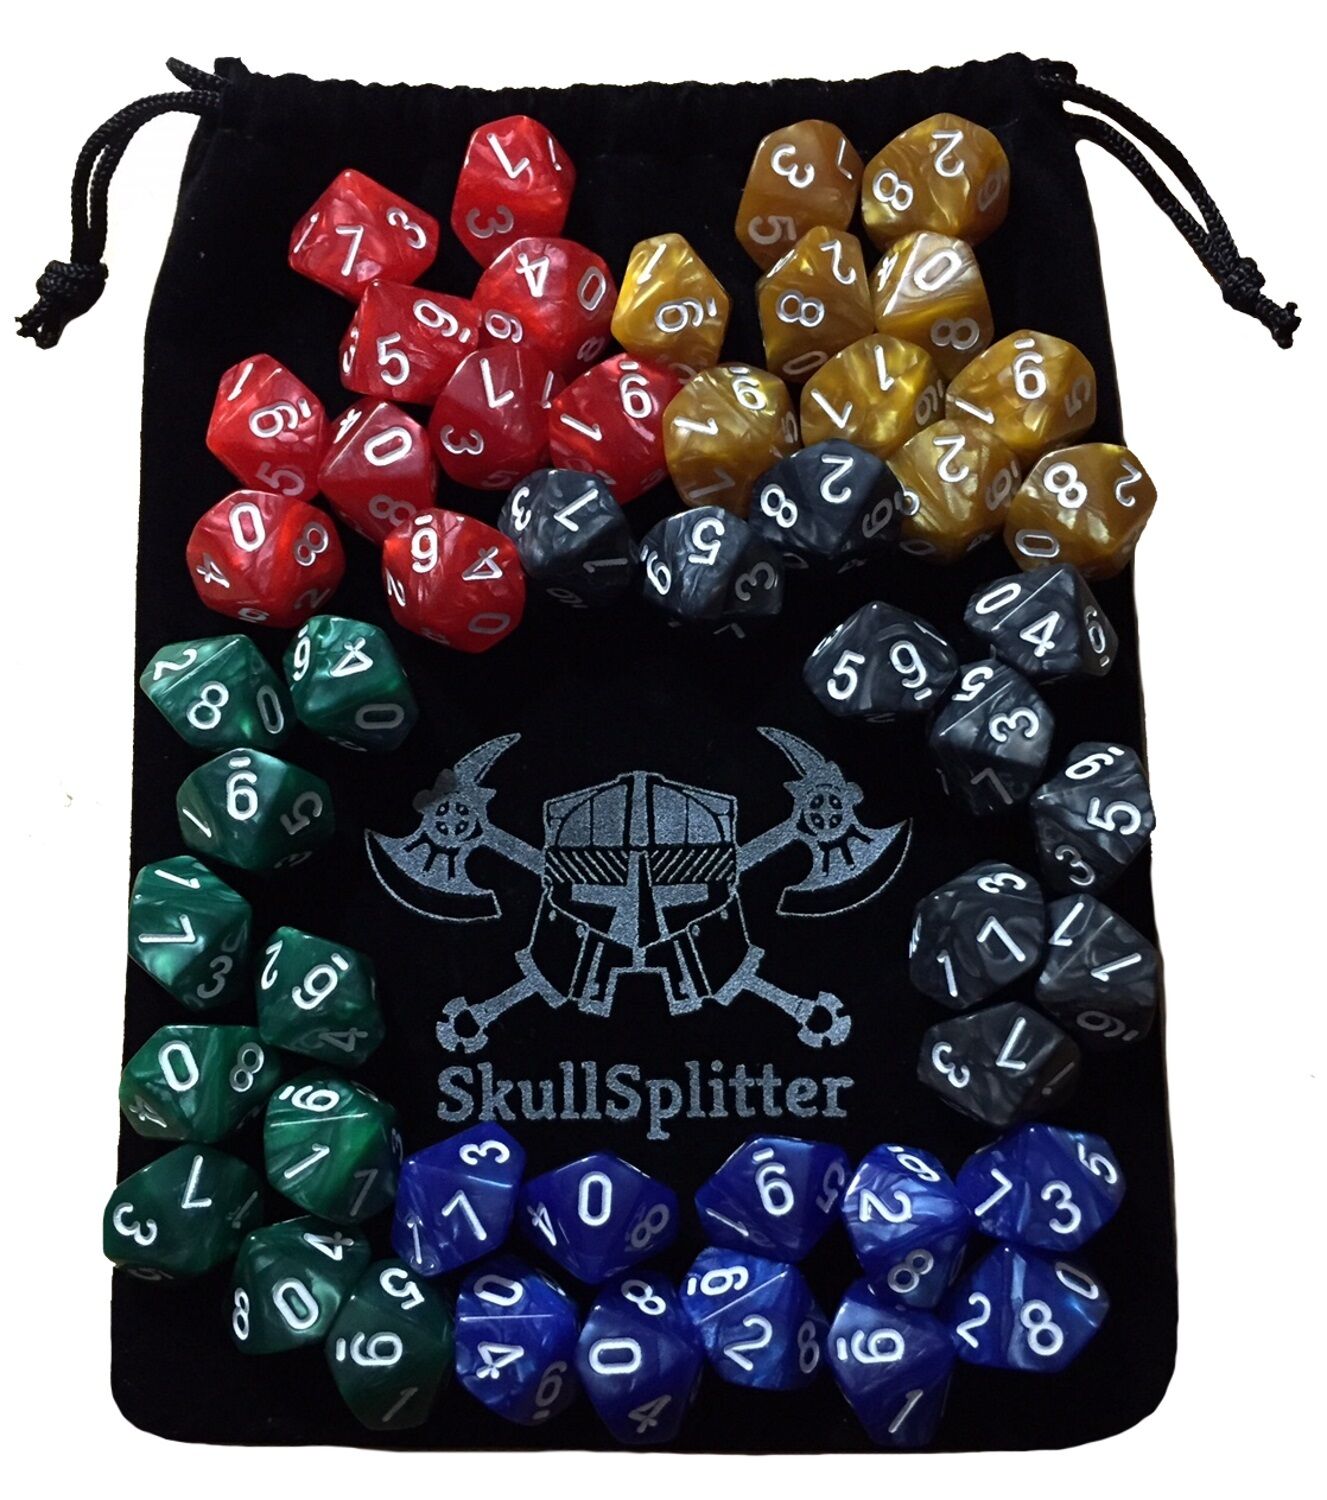 D10 Dice Set-5 Complete Sets, Perfect For Wod Or Math Dice Games - Counters